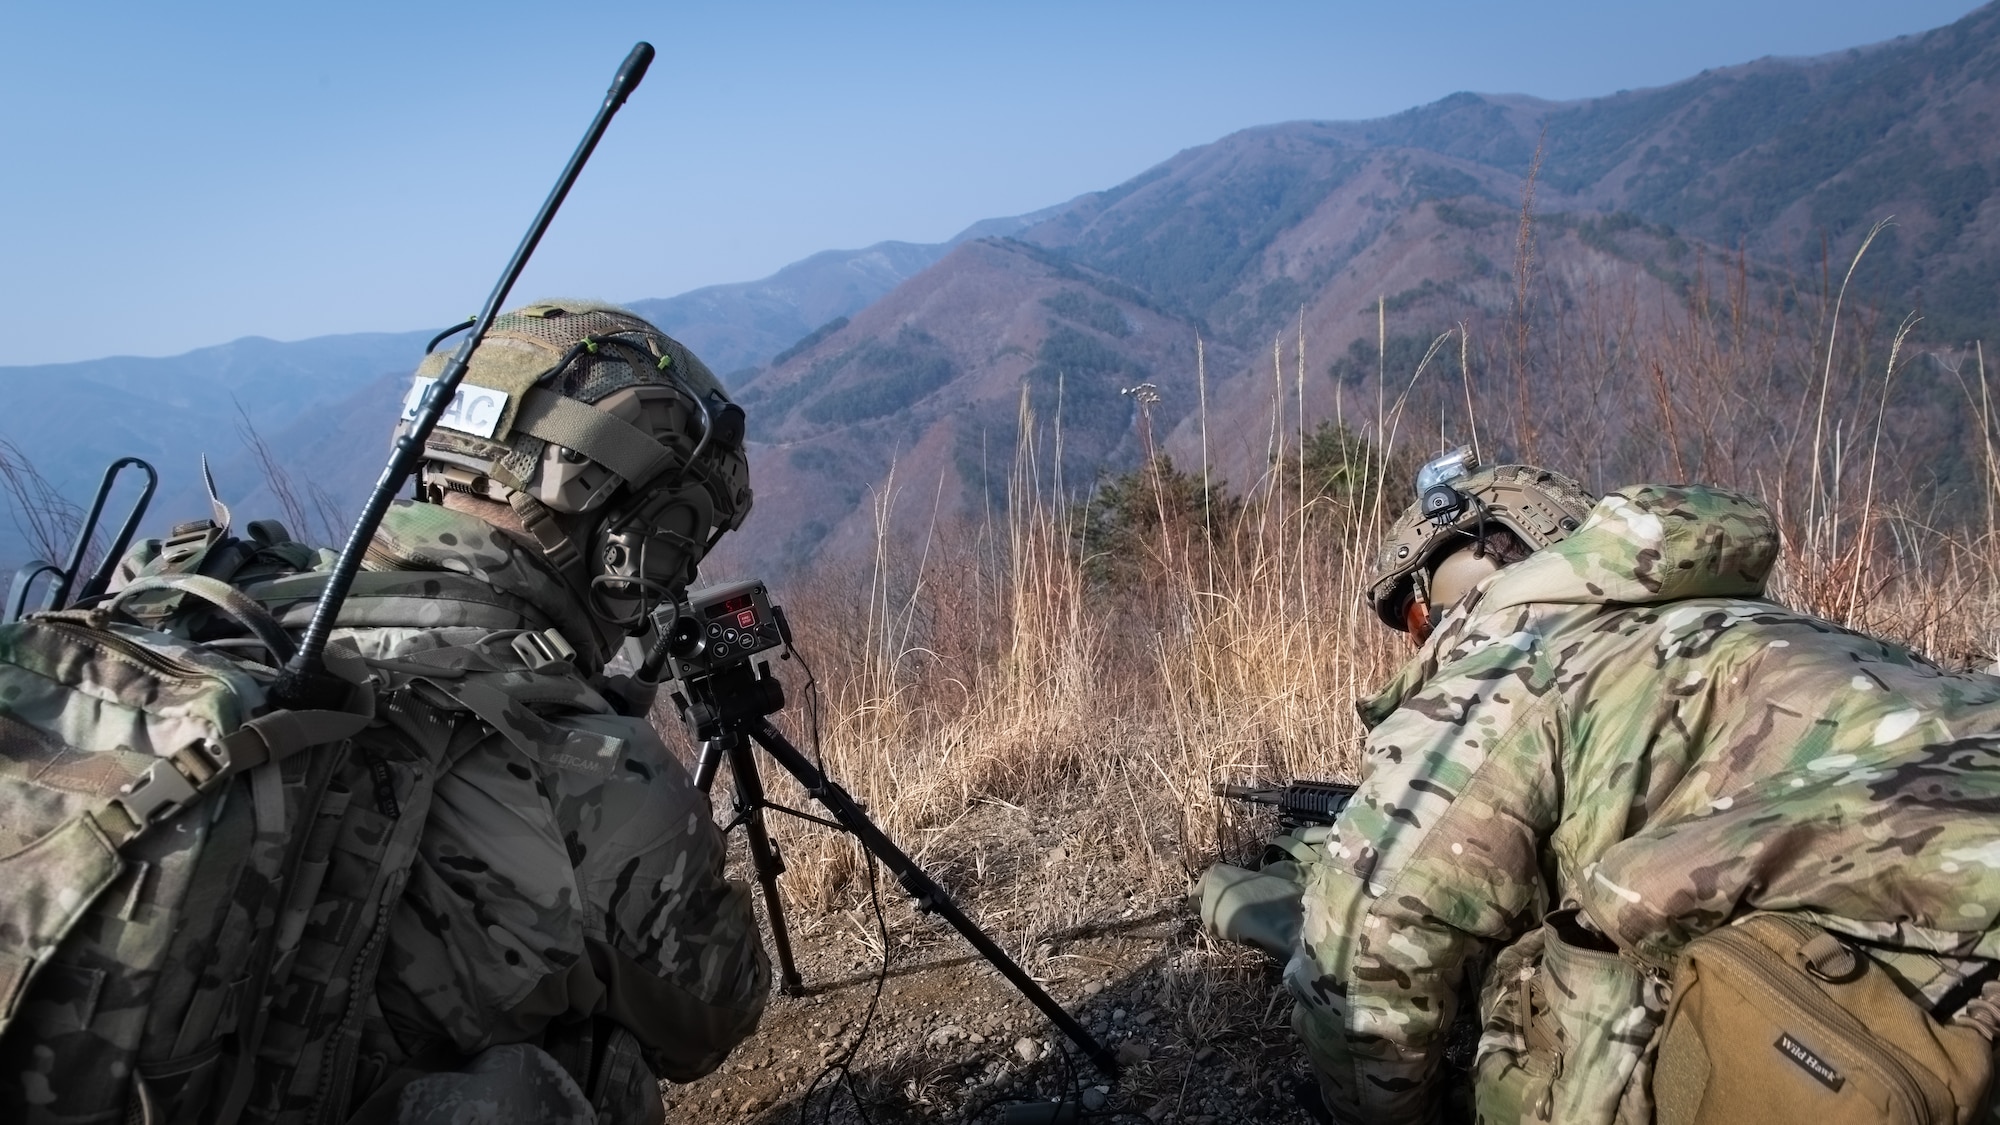 Two U.S. Air Force joint terminal attack controllers utilize a laser designator designed to designate a target during training at Pilsung Range in Gangwan Province, Republic of Korea, Feb. 14, 2019.